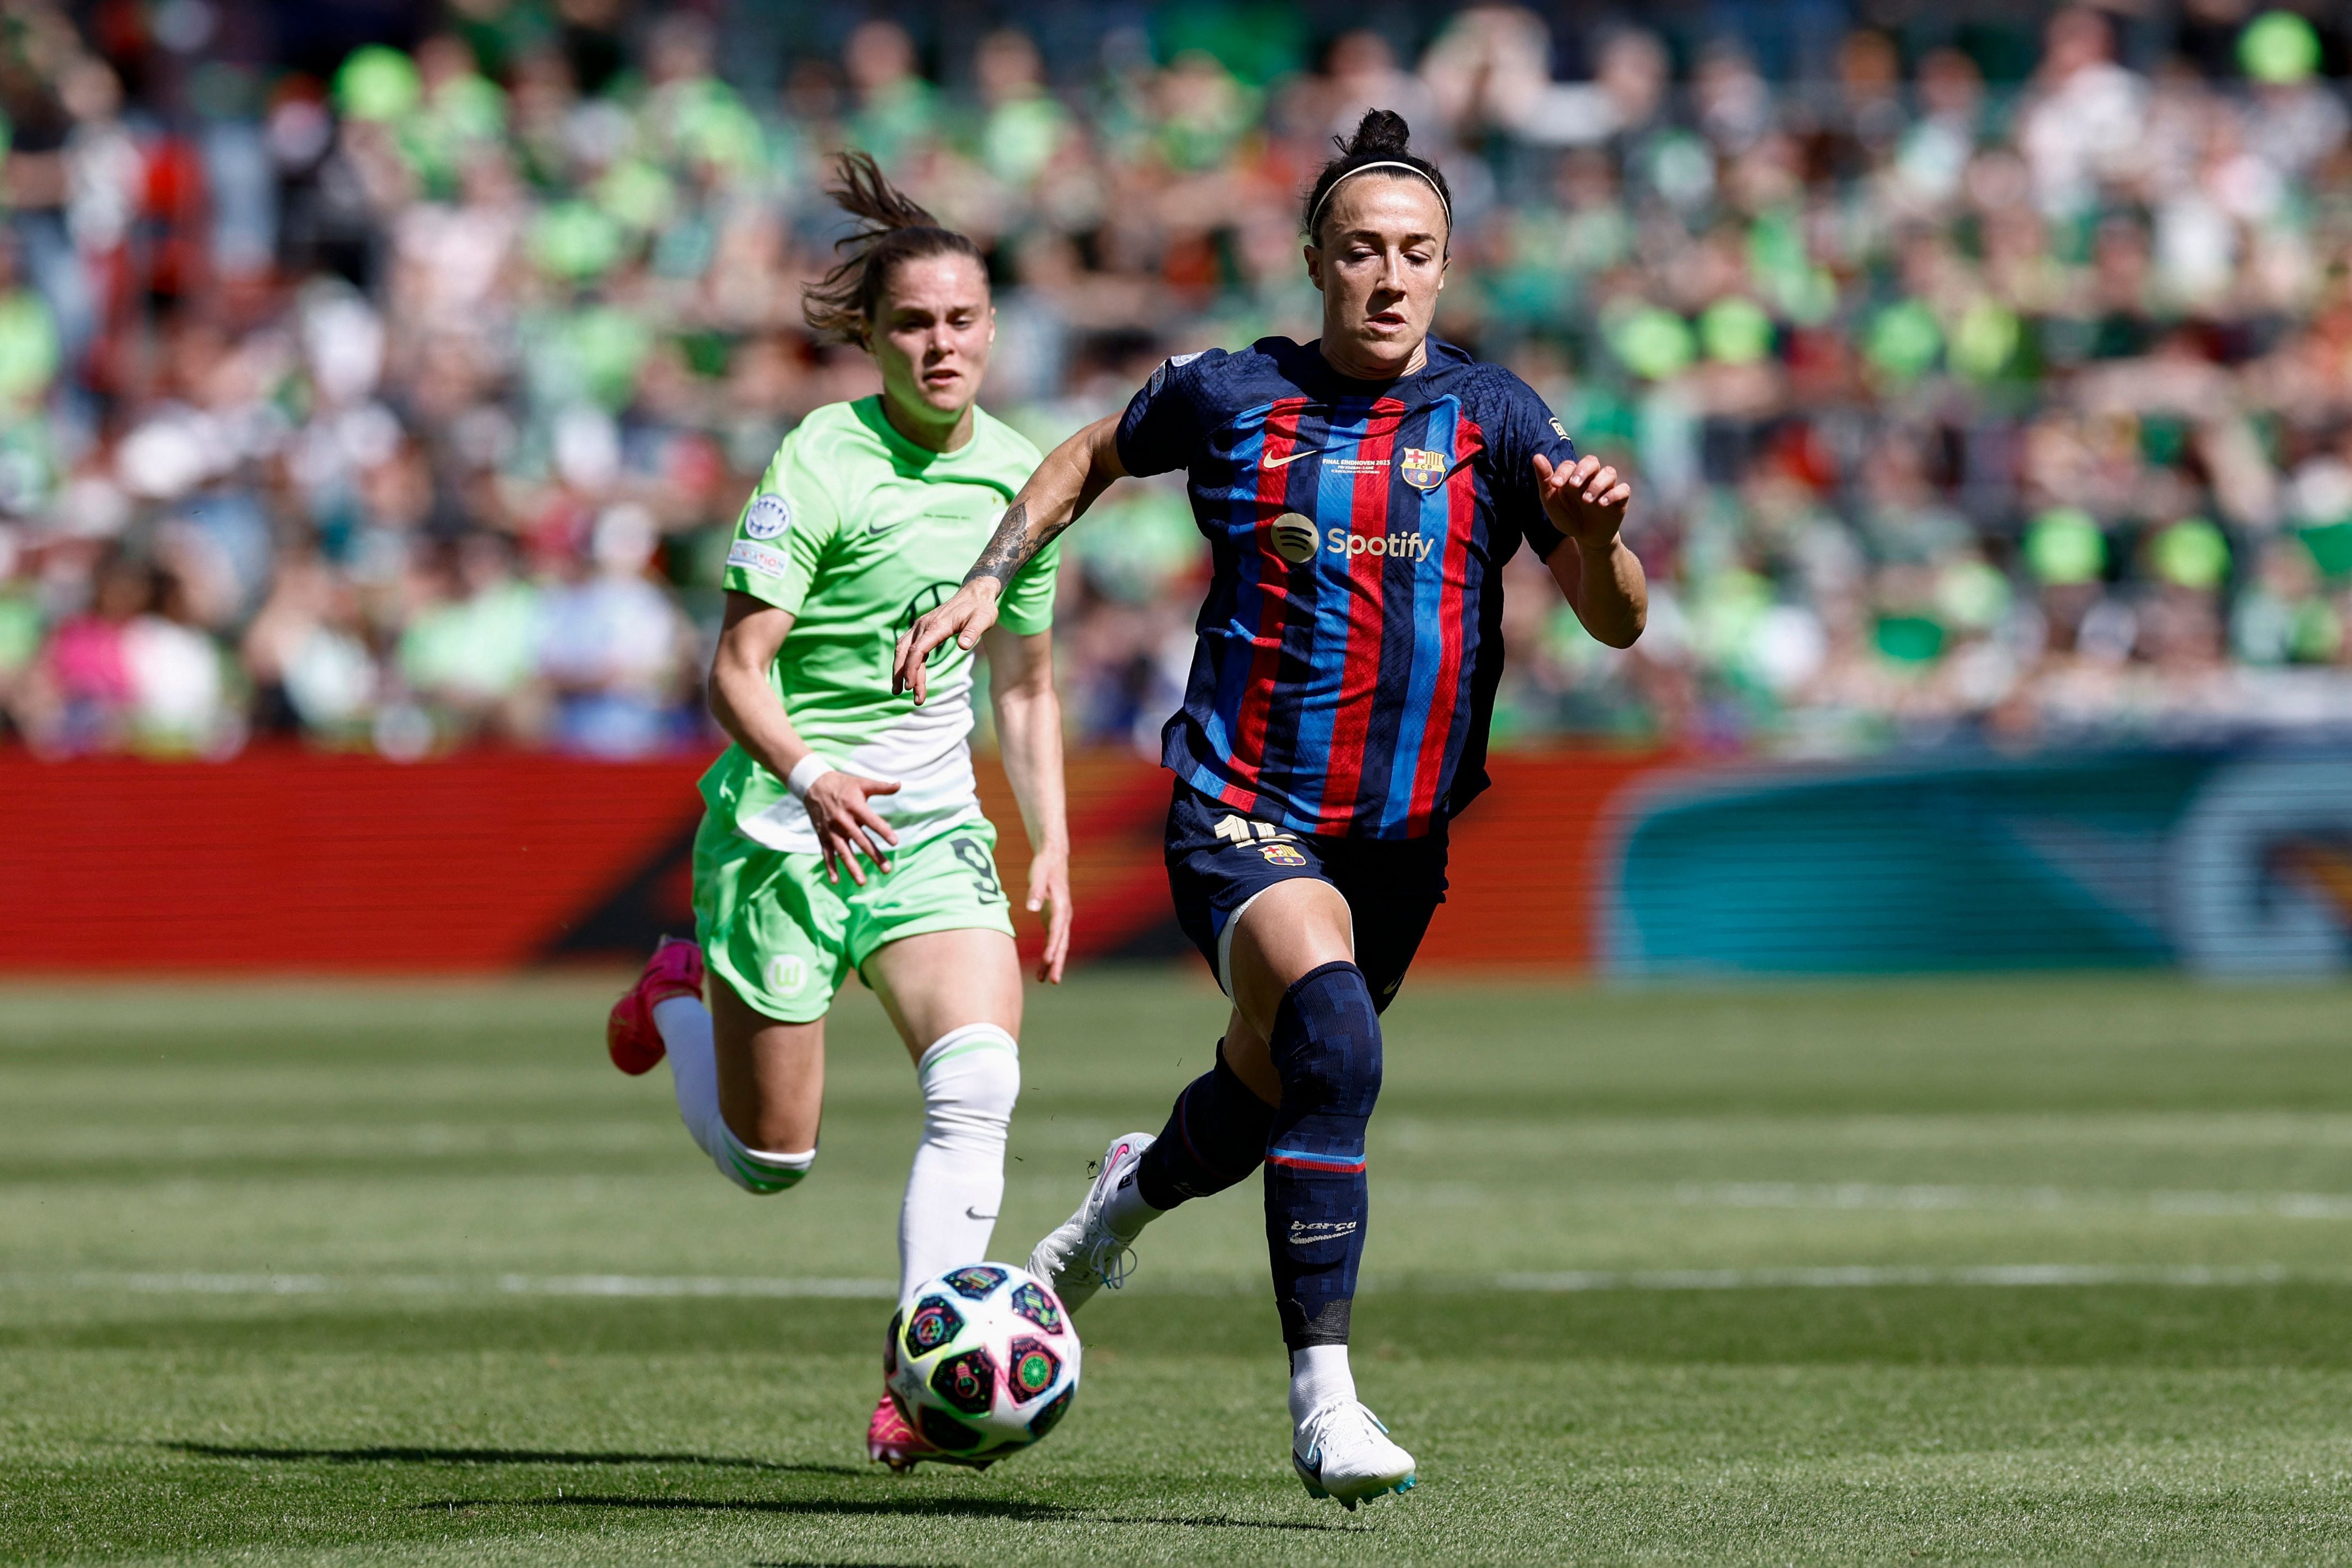 Wolfsburg's Polish forward Ewa Pajor (L) fights for the ball with Barcelona's English defender Lucy Bronze (R) during the UEFA Women's Champions League final football match between FC Barcelona and Wolfsburg in Philips Stadium, in Eindhoven, on June 3, 2023. (Photo by KENZO TRIBOUILLARD / AFP)